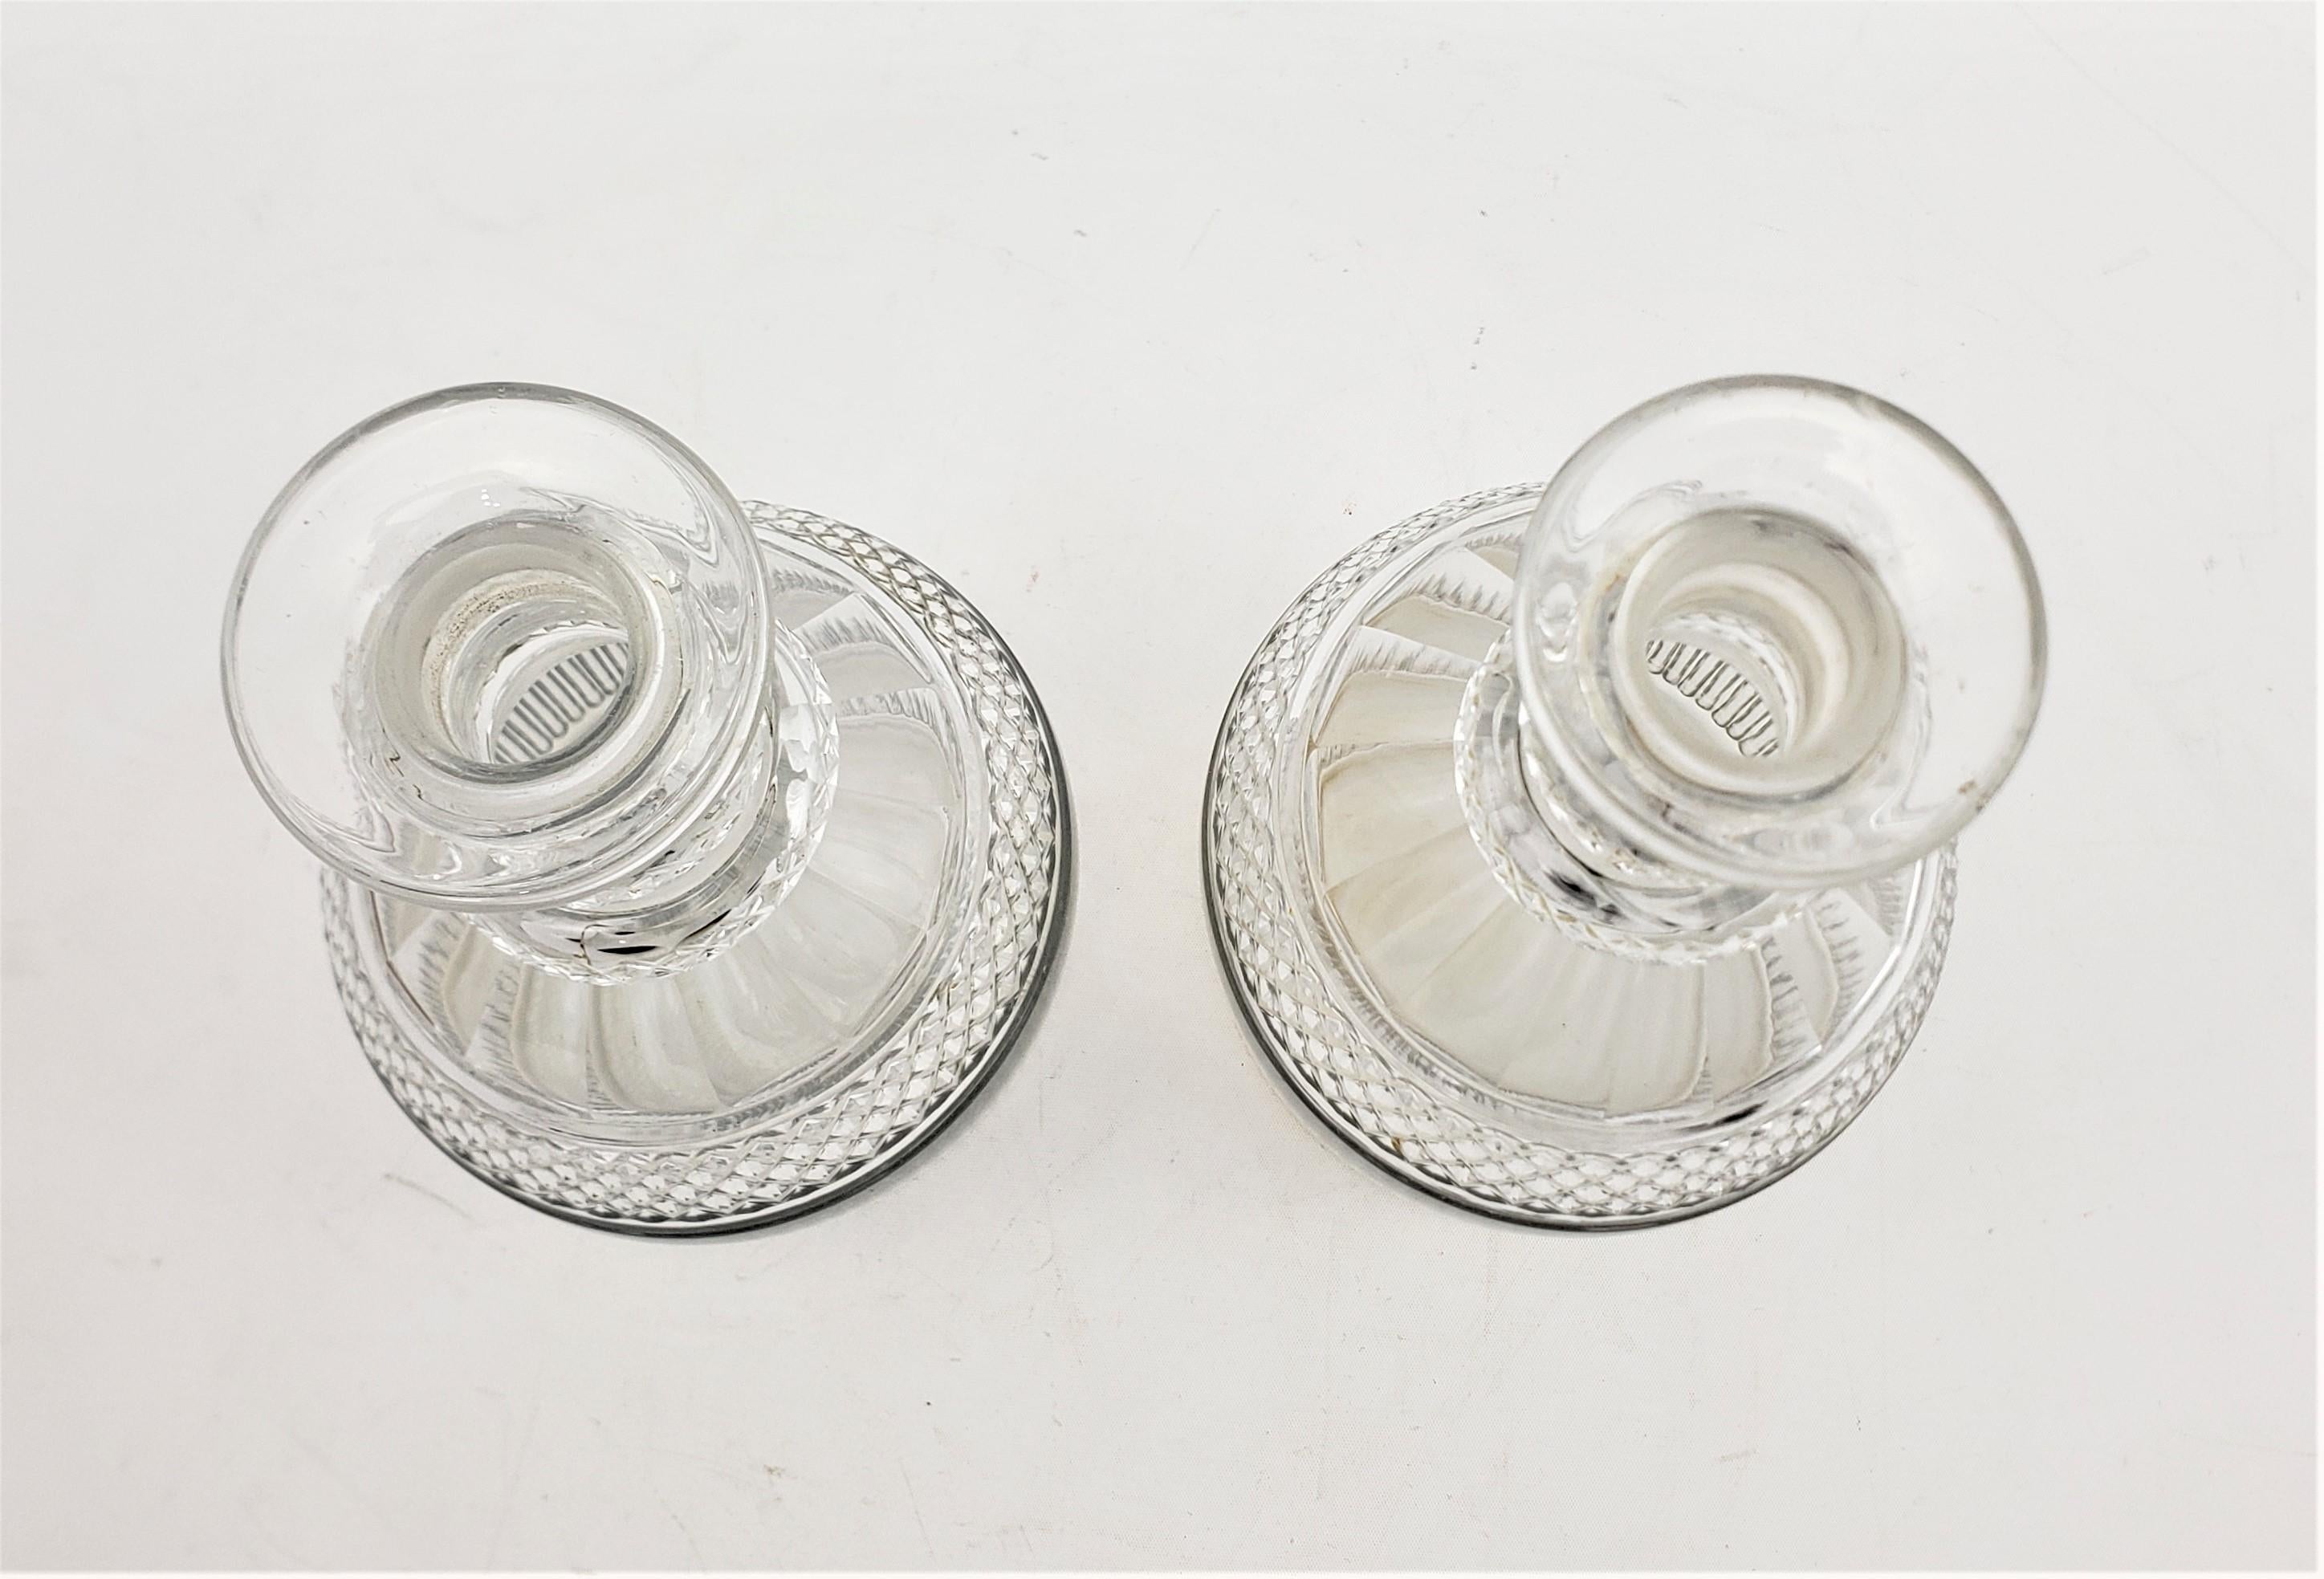 Pair of Antique George III Glass Decanters with 3 Neck Rings & Mushroom Stoppers In Good Condition For Sale In Hamilton, Ontario